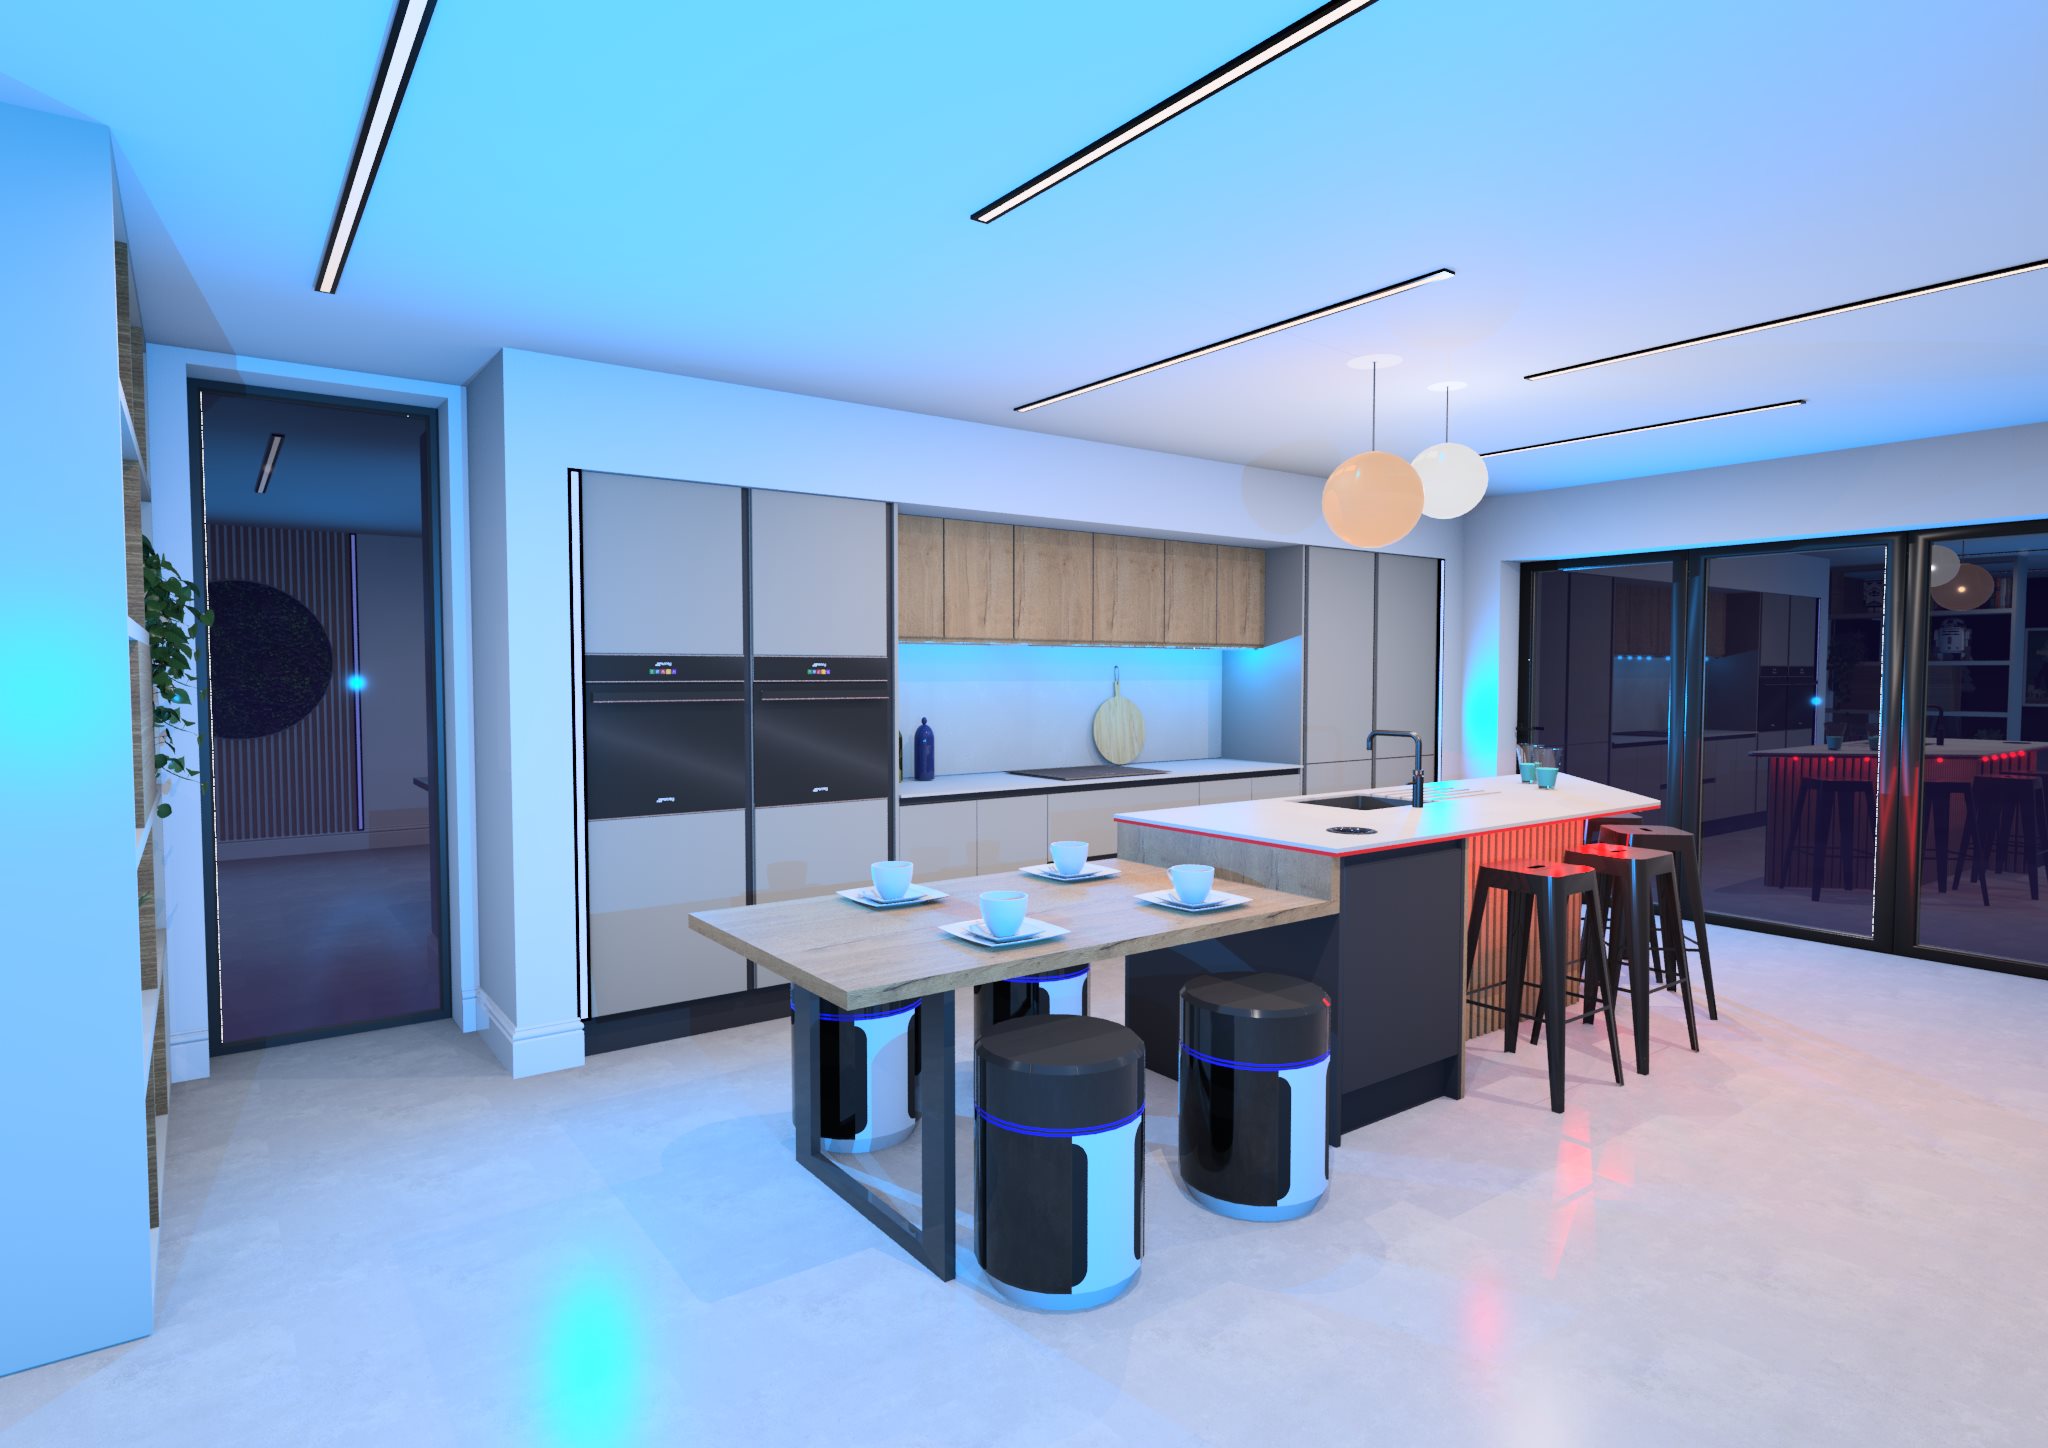 kitchen with kitchen island that is star wars themed with blue LED lighting